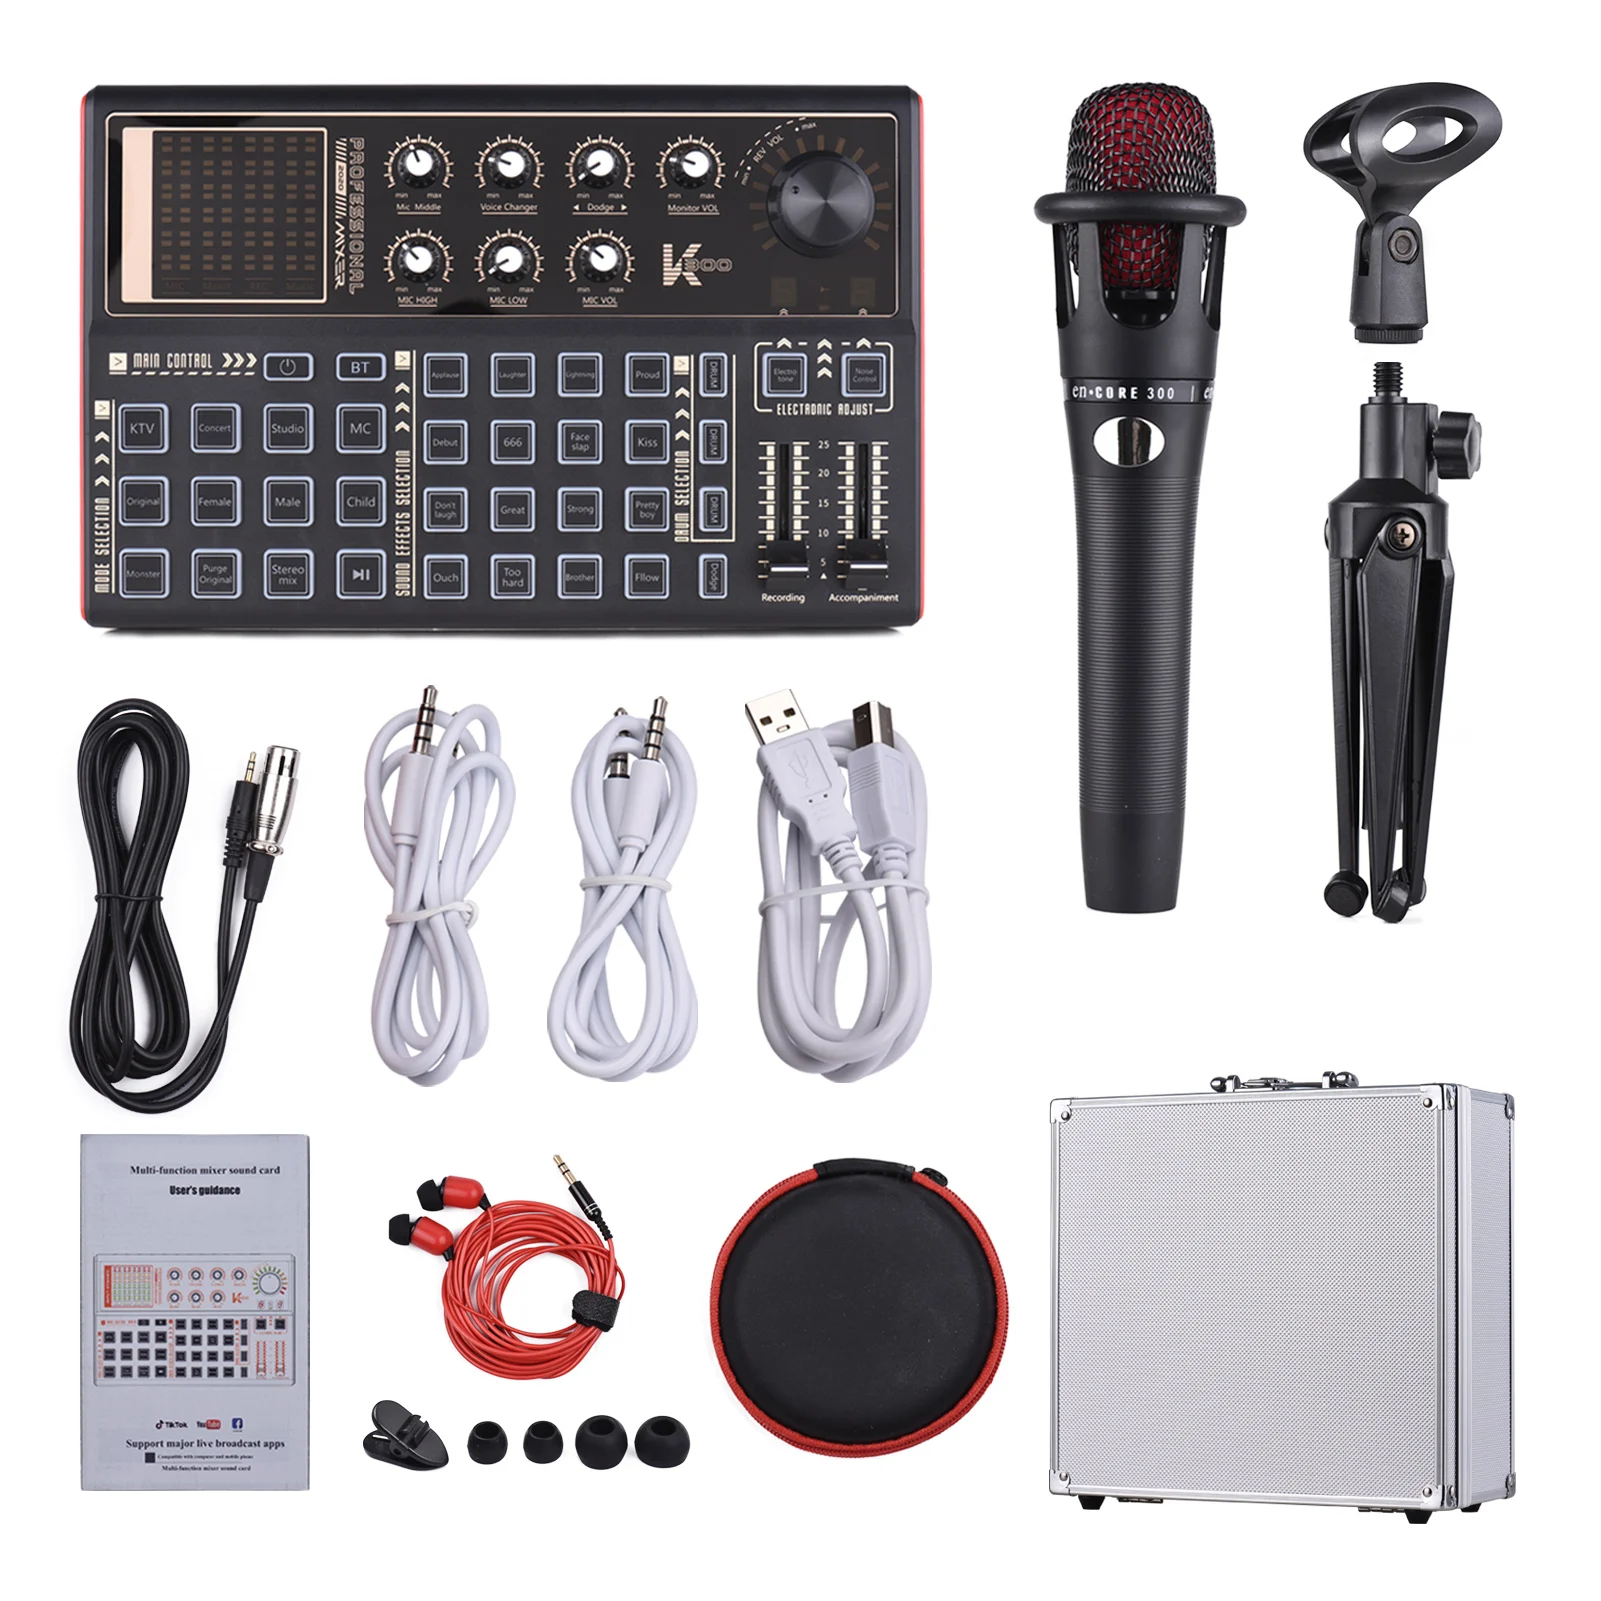 

Muslady K300 Live Sound Card External Voice Changer Audio Mixer Kit Built-in Rechargeable Battery Multiple Sound Effects